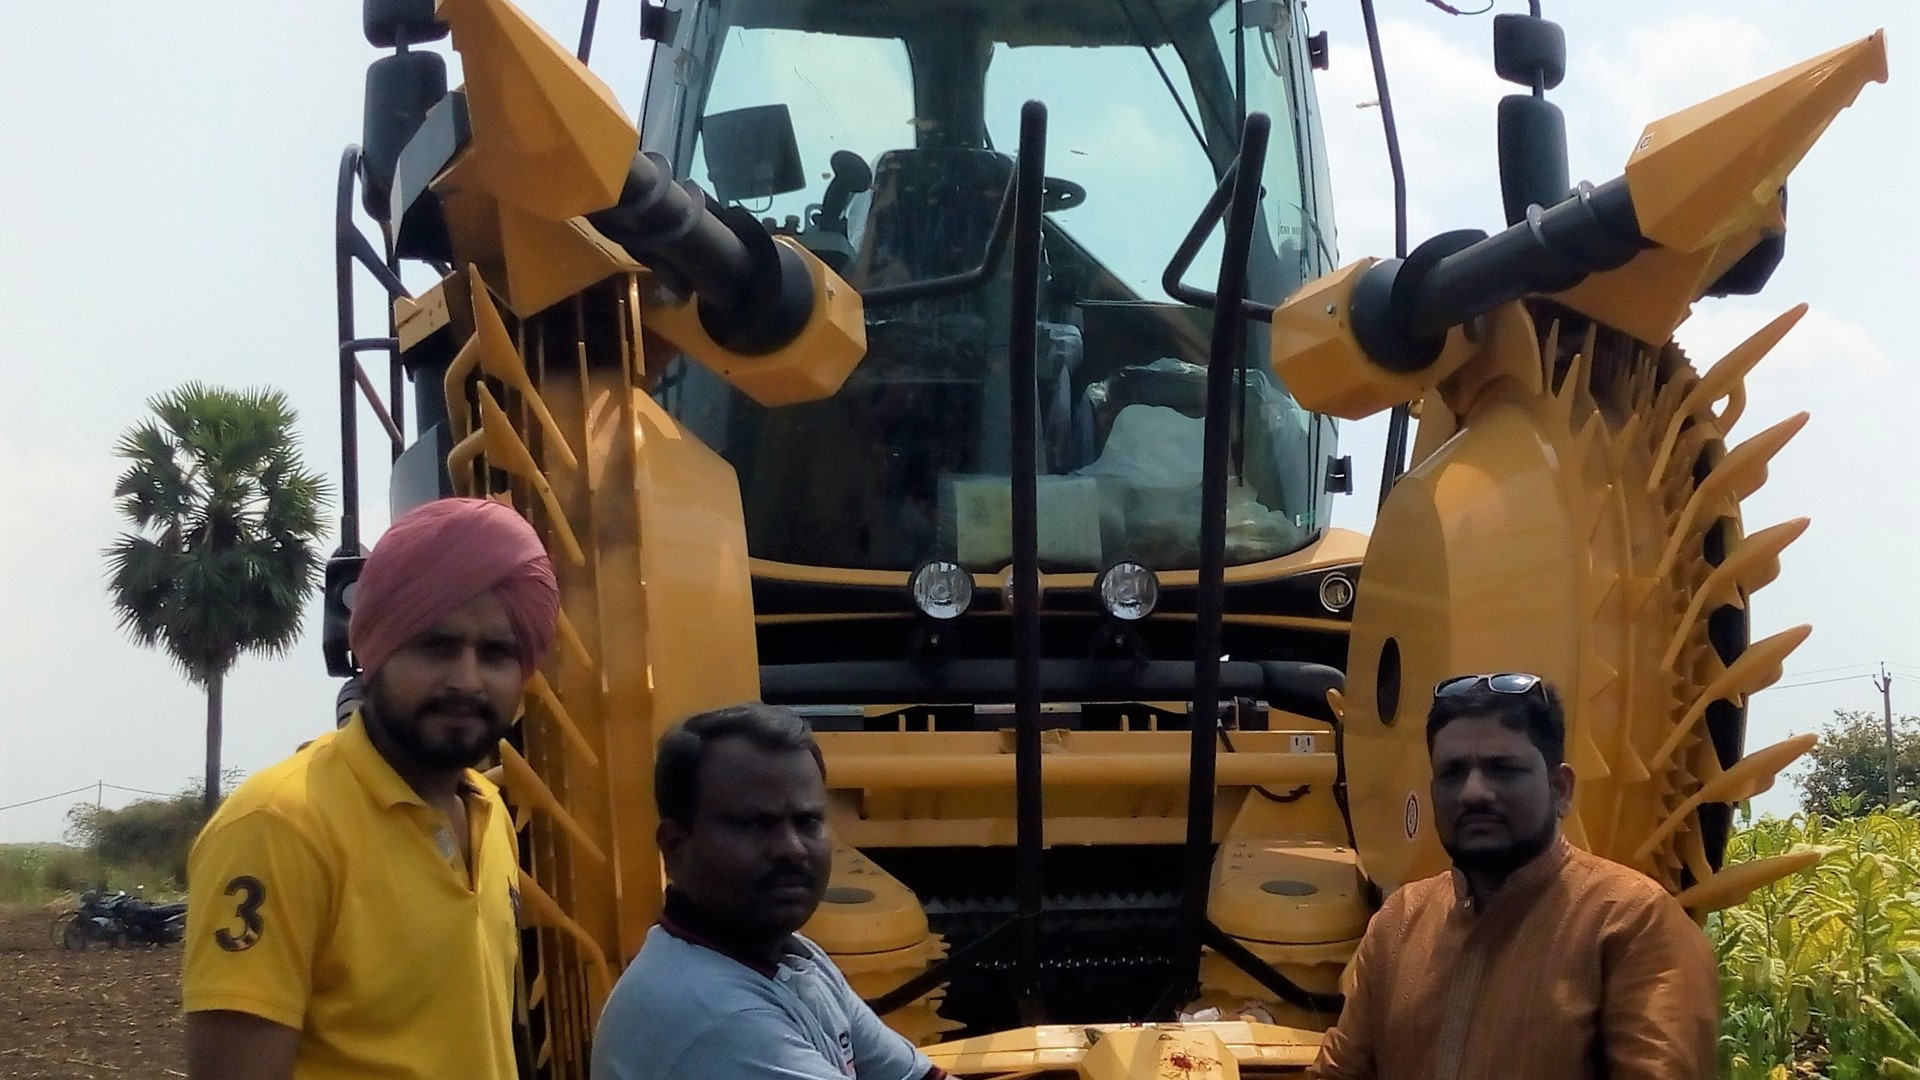 New Holland Agriculture delivers its powerful FR500 Forage Harvester in Andhra Pradesh